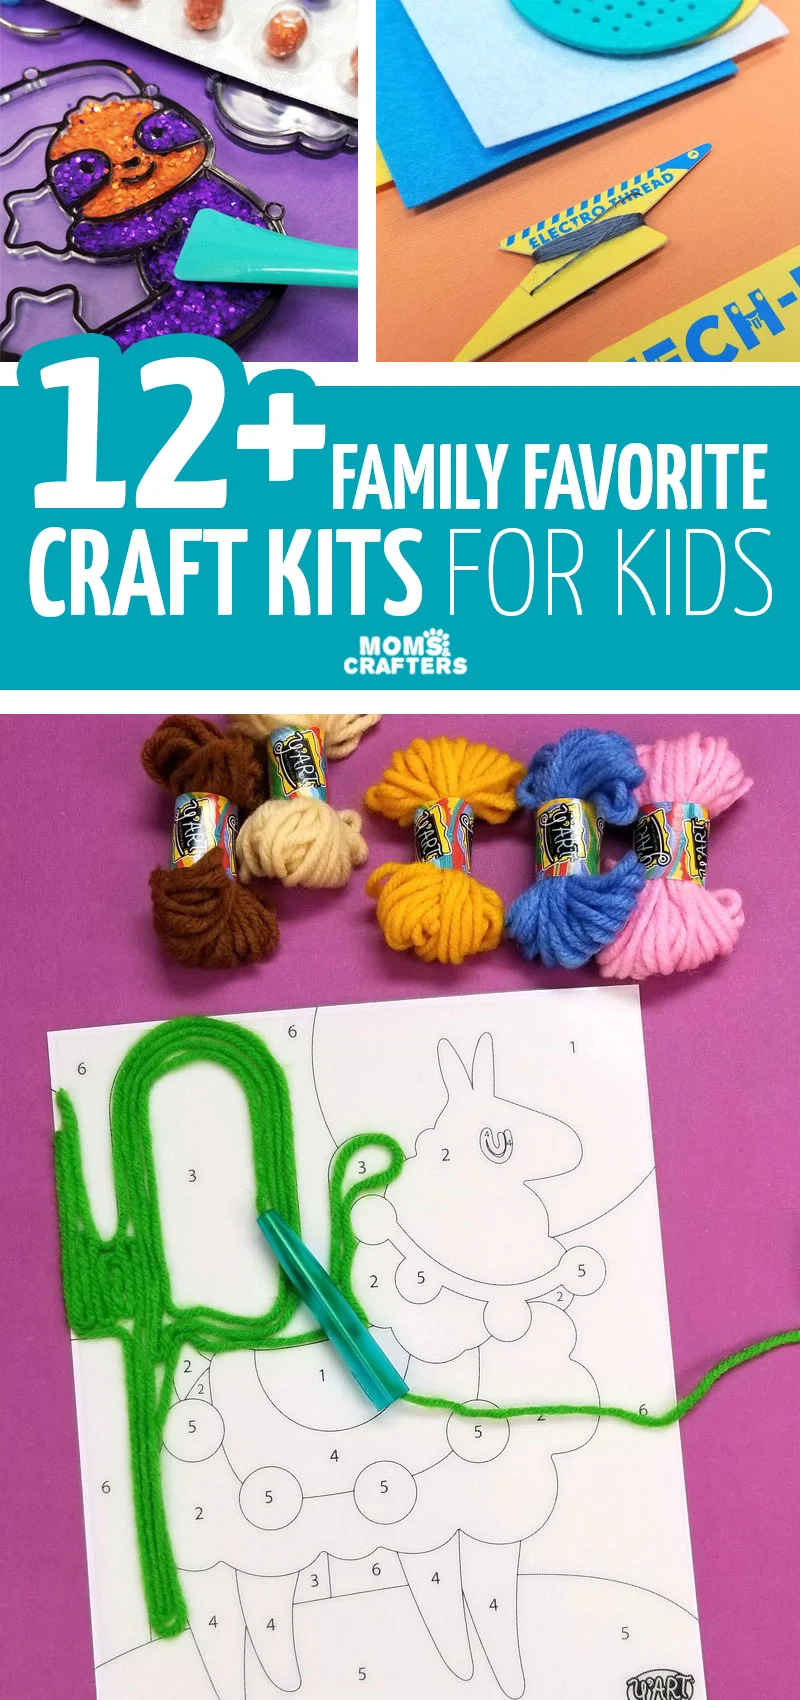 Click for some cool craft making kids for kids of all ages! These arts and crafts for kids all come in kit form so you can make them easily even if youre a beginner!